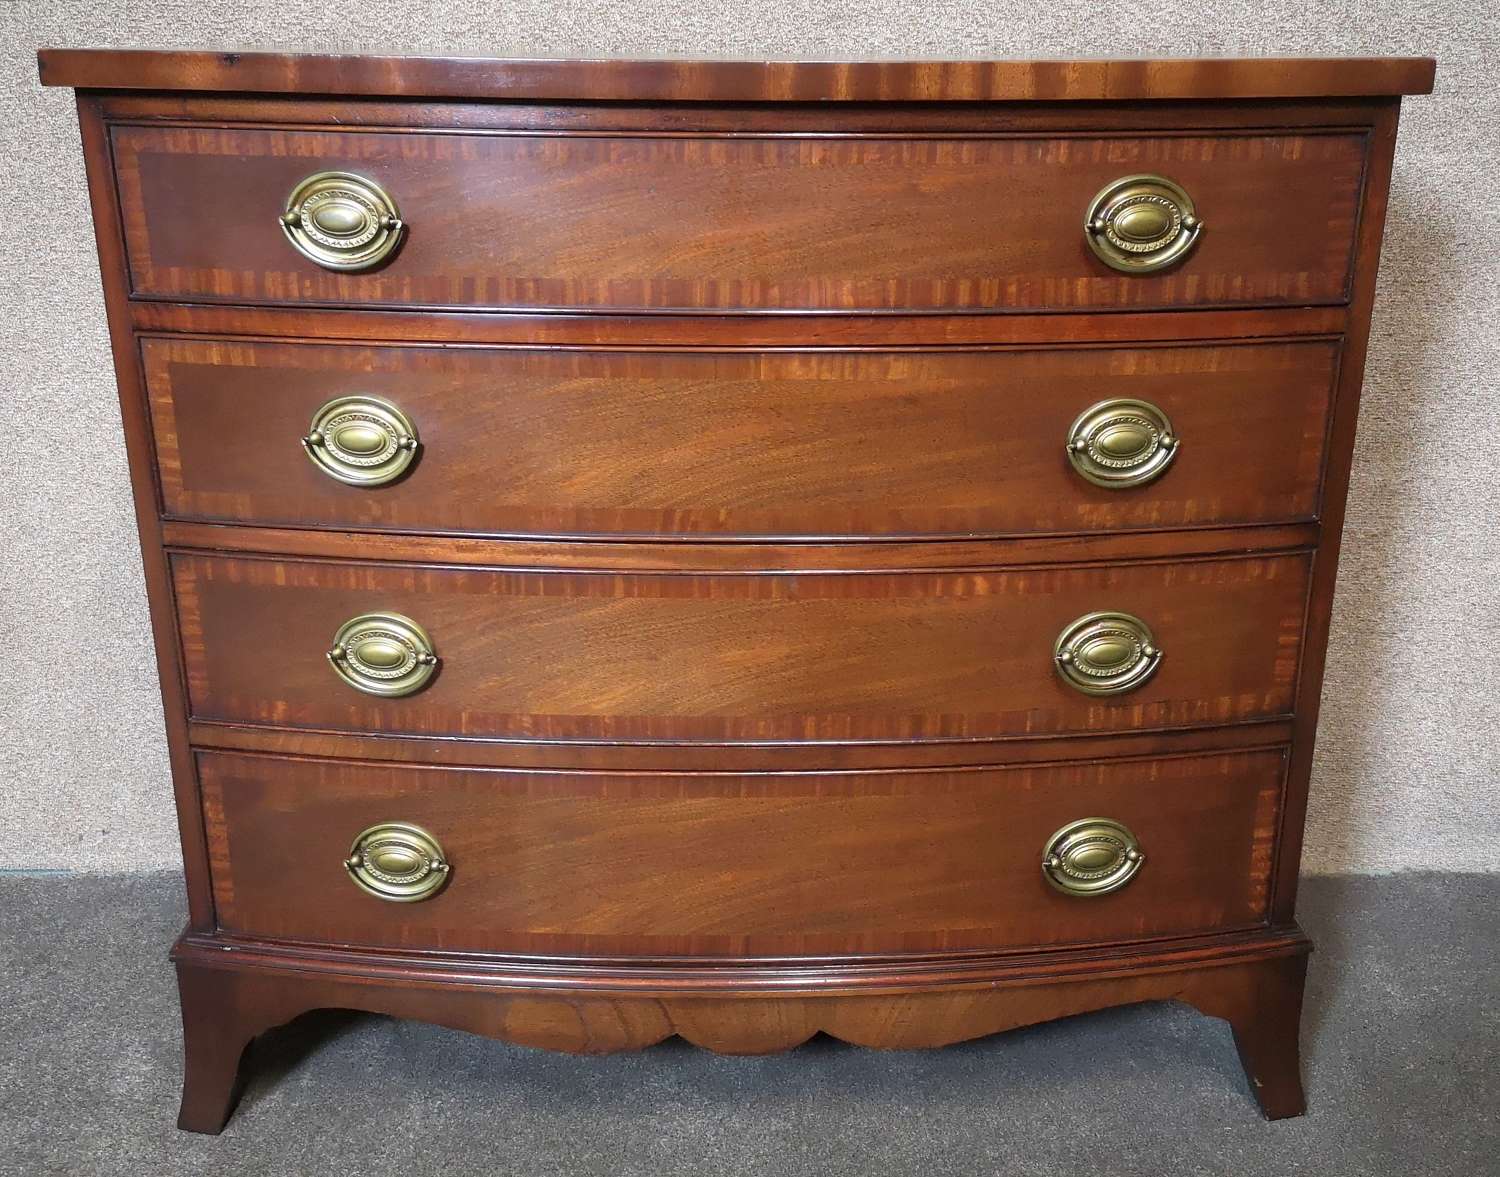 Reproduction Mahogany Bow Front Chest of Drawers In The Georgian Style